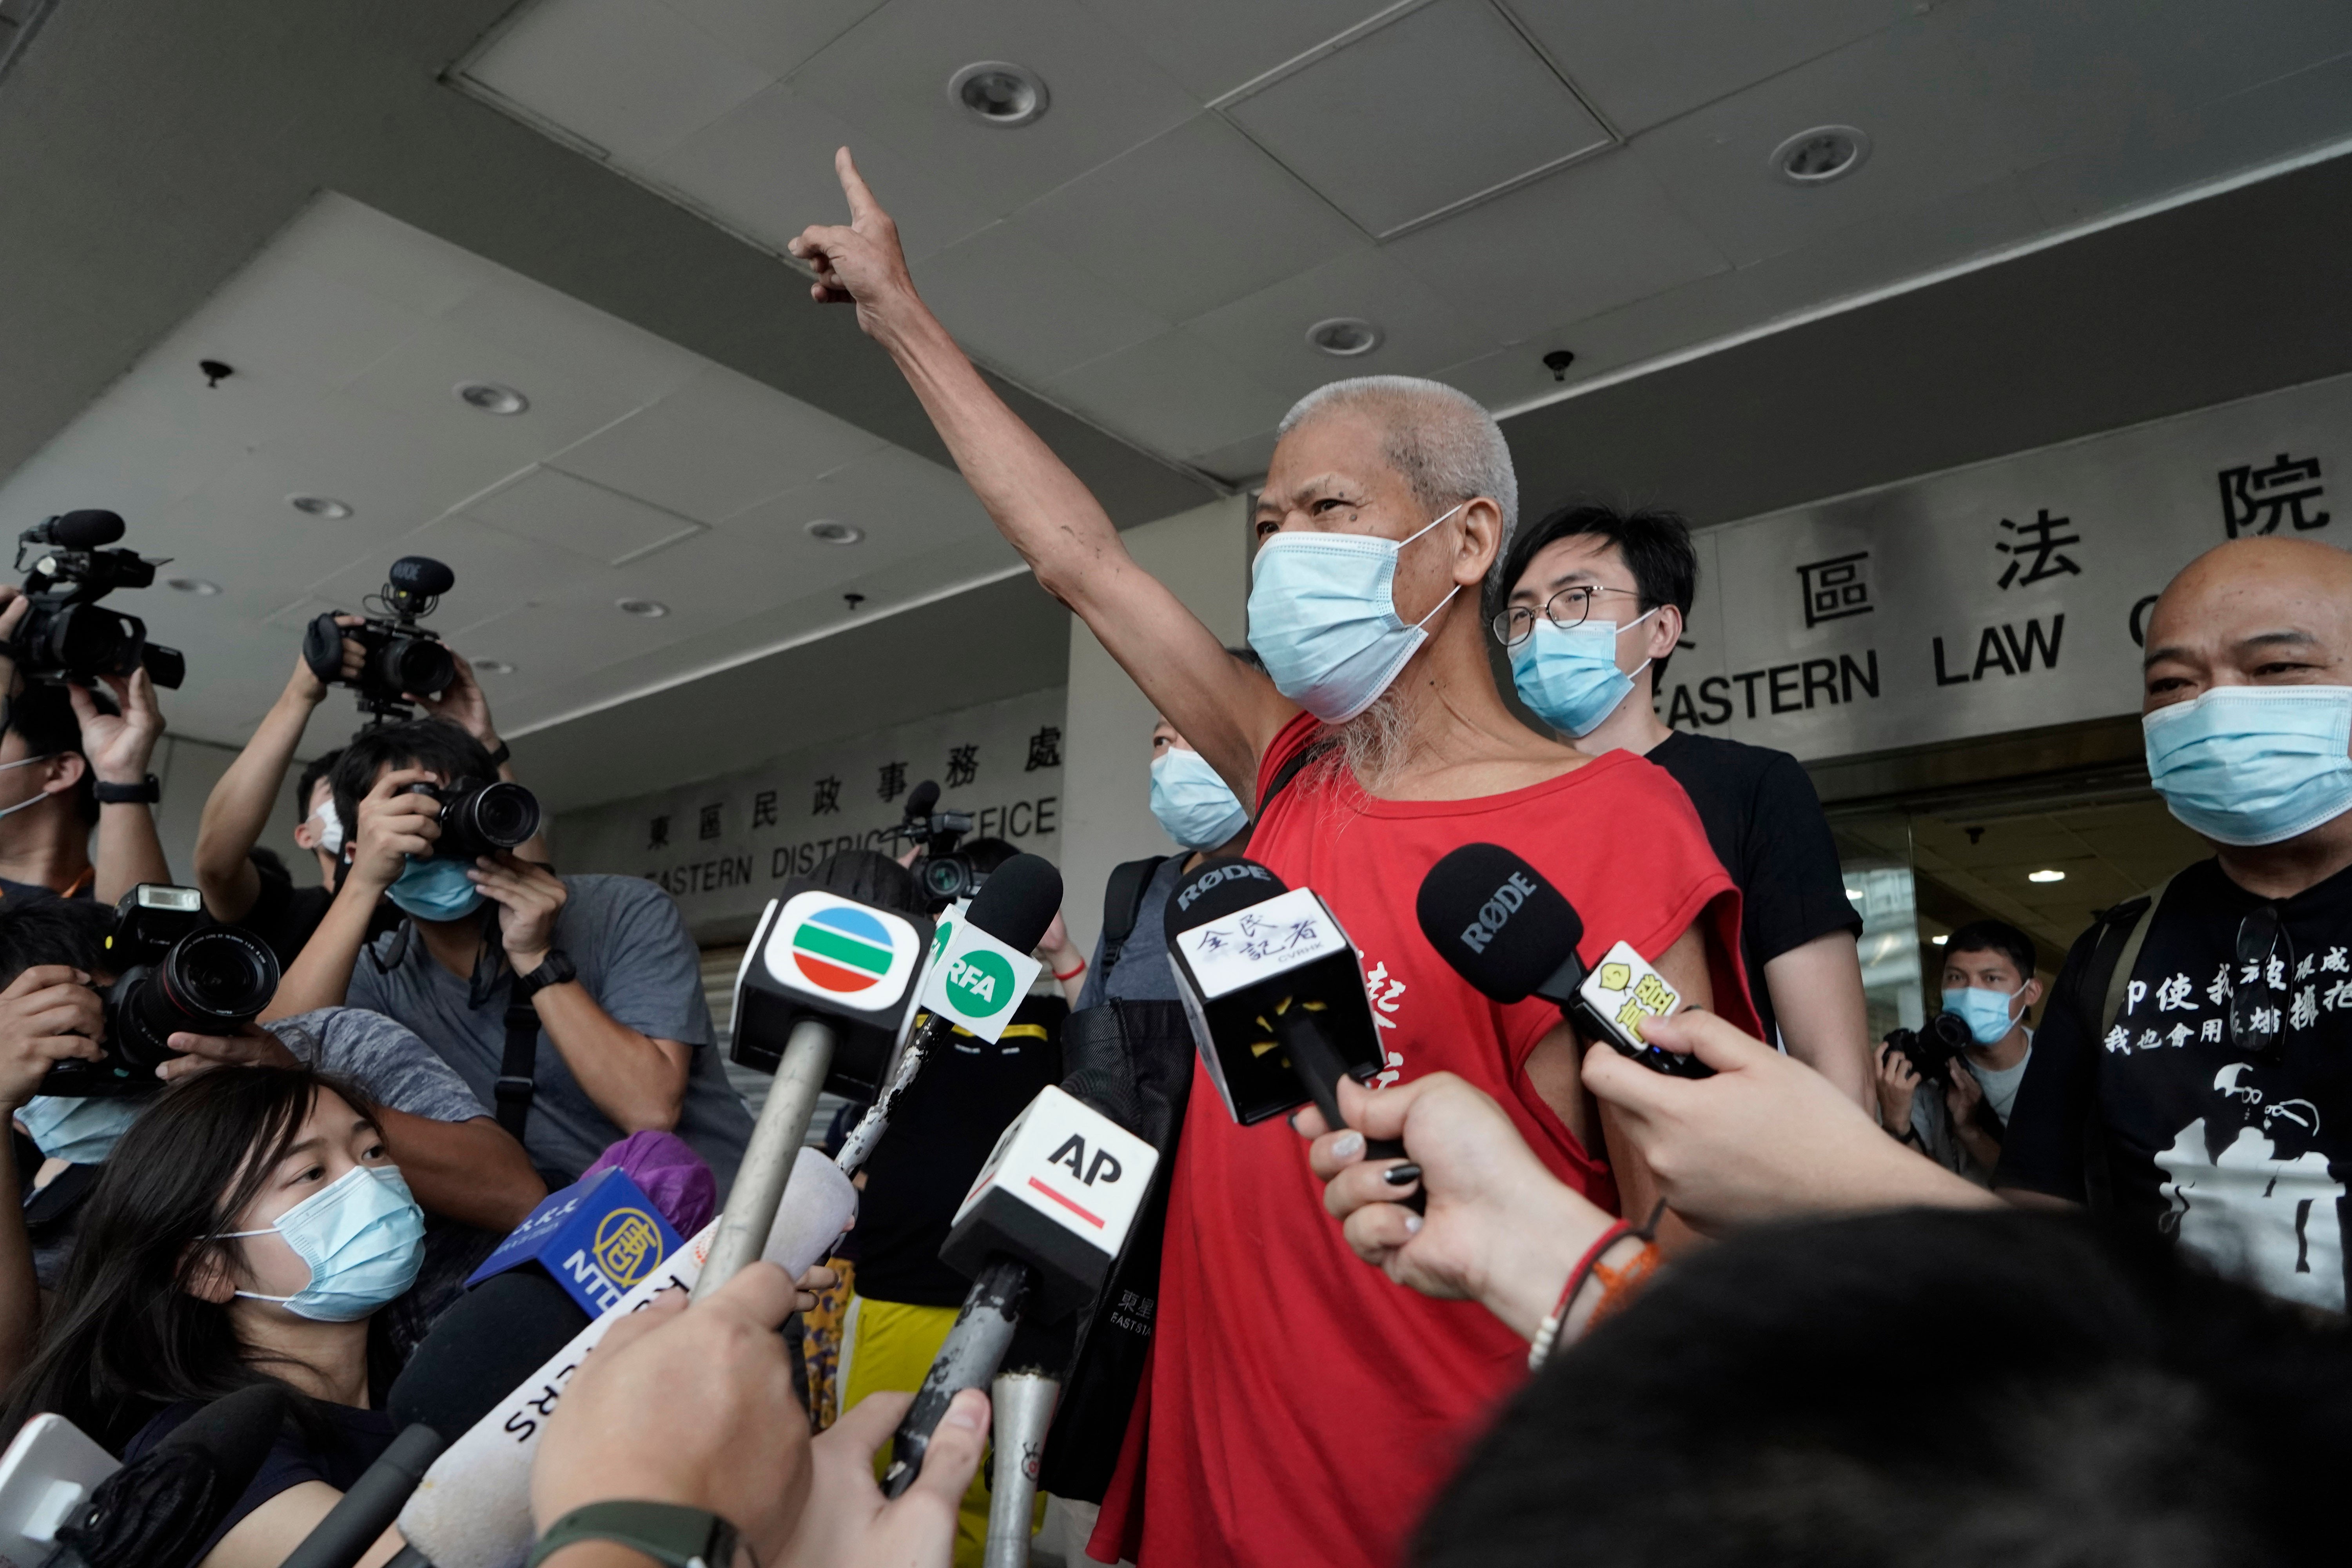 File photo: Hong Kong activist Koo Sze-yiu speaks to the media after arriving at a court in Hong Kong on 30 September 2020